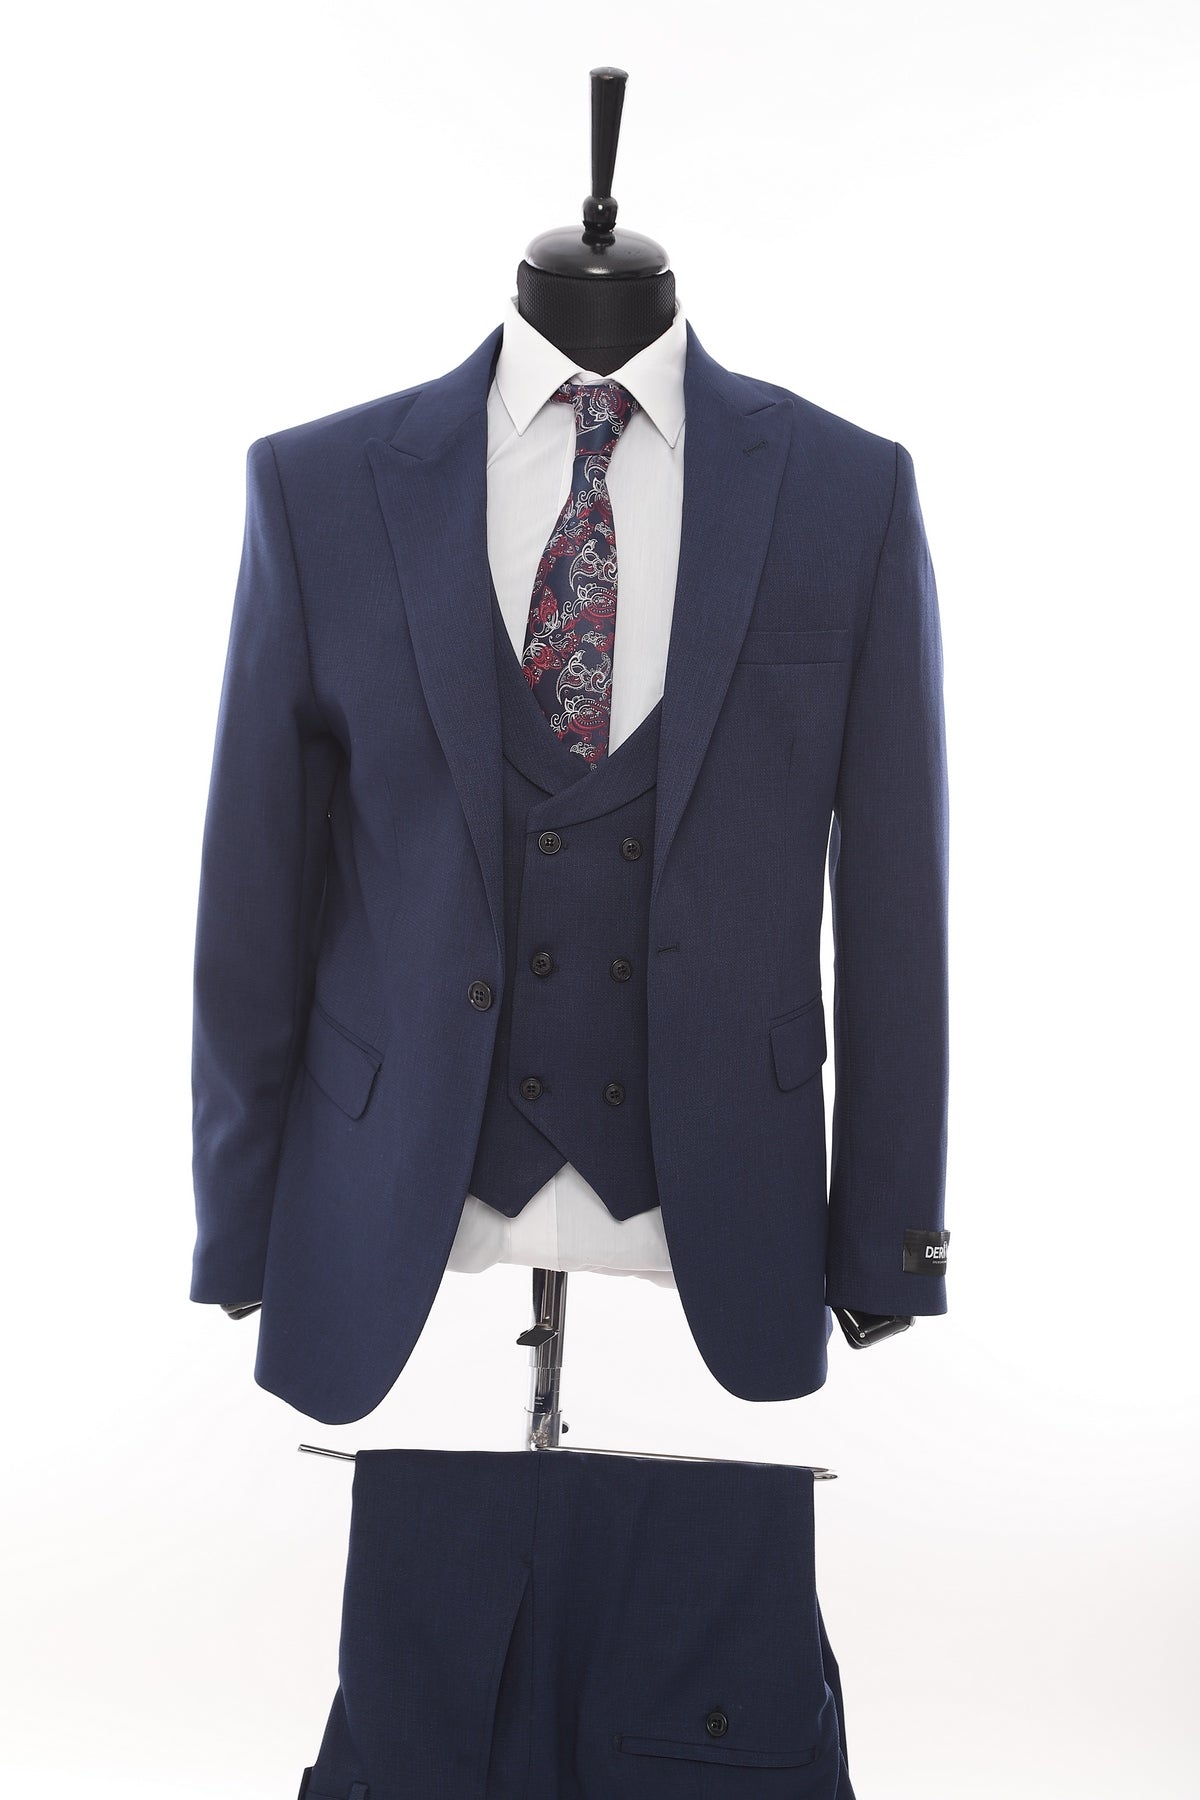 Navy Patterned Fabric Luxury Suit 3 Pieces